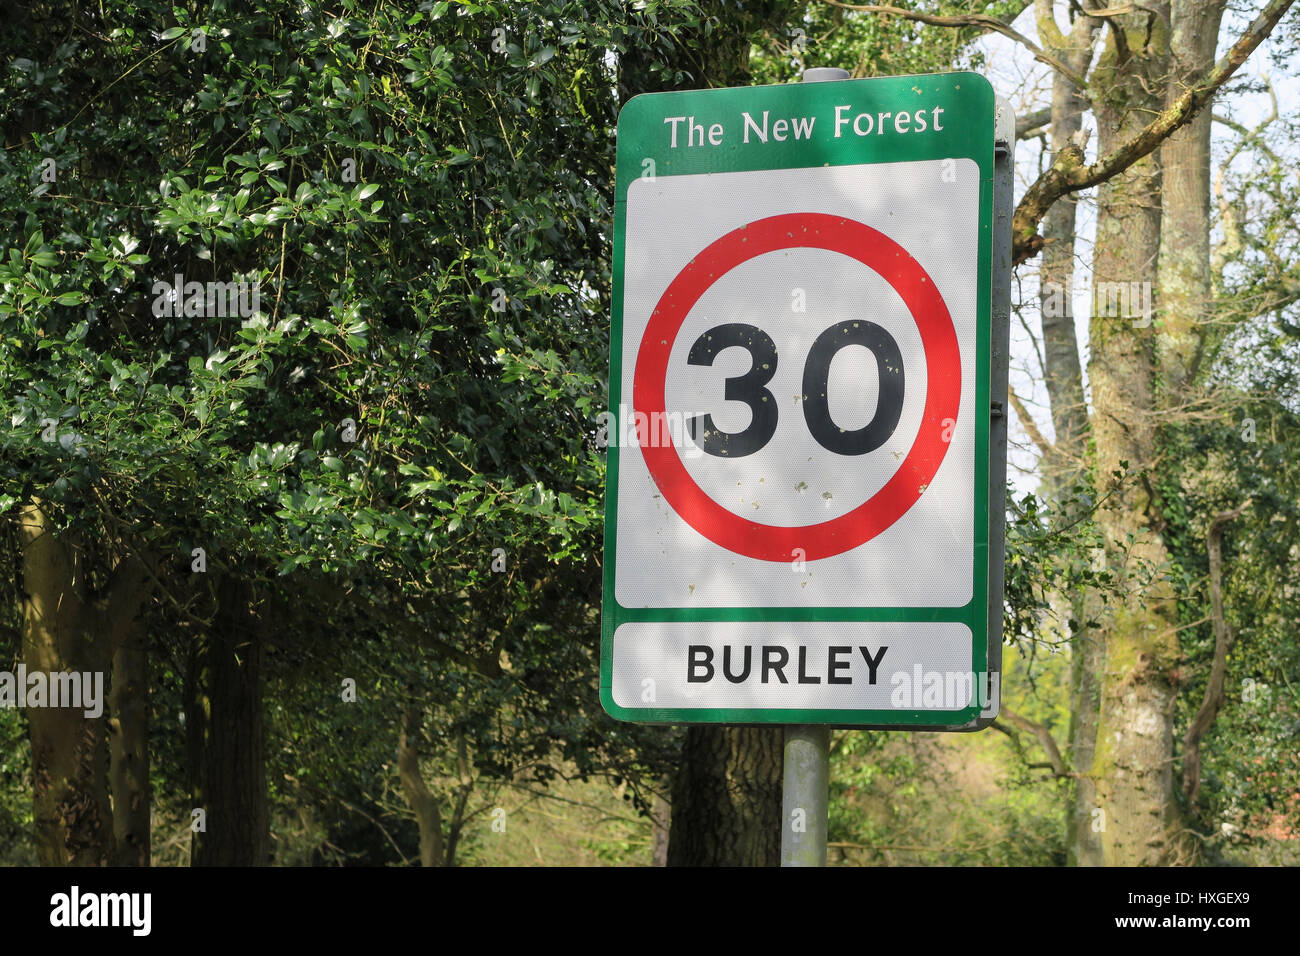 30mph road sign in Burley. To prevent animal deaths in The New Forest, cars are restricted to low speeds. Stock Photo